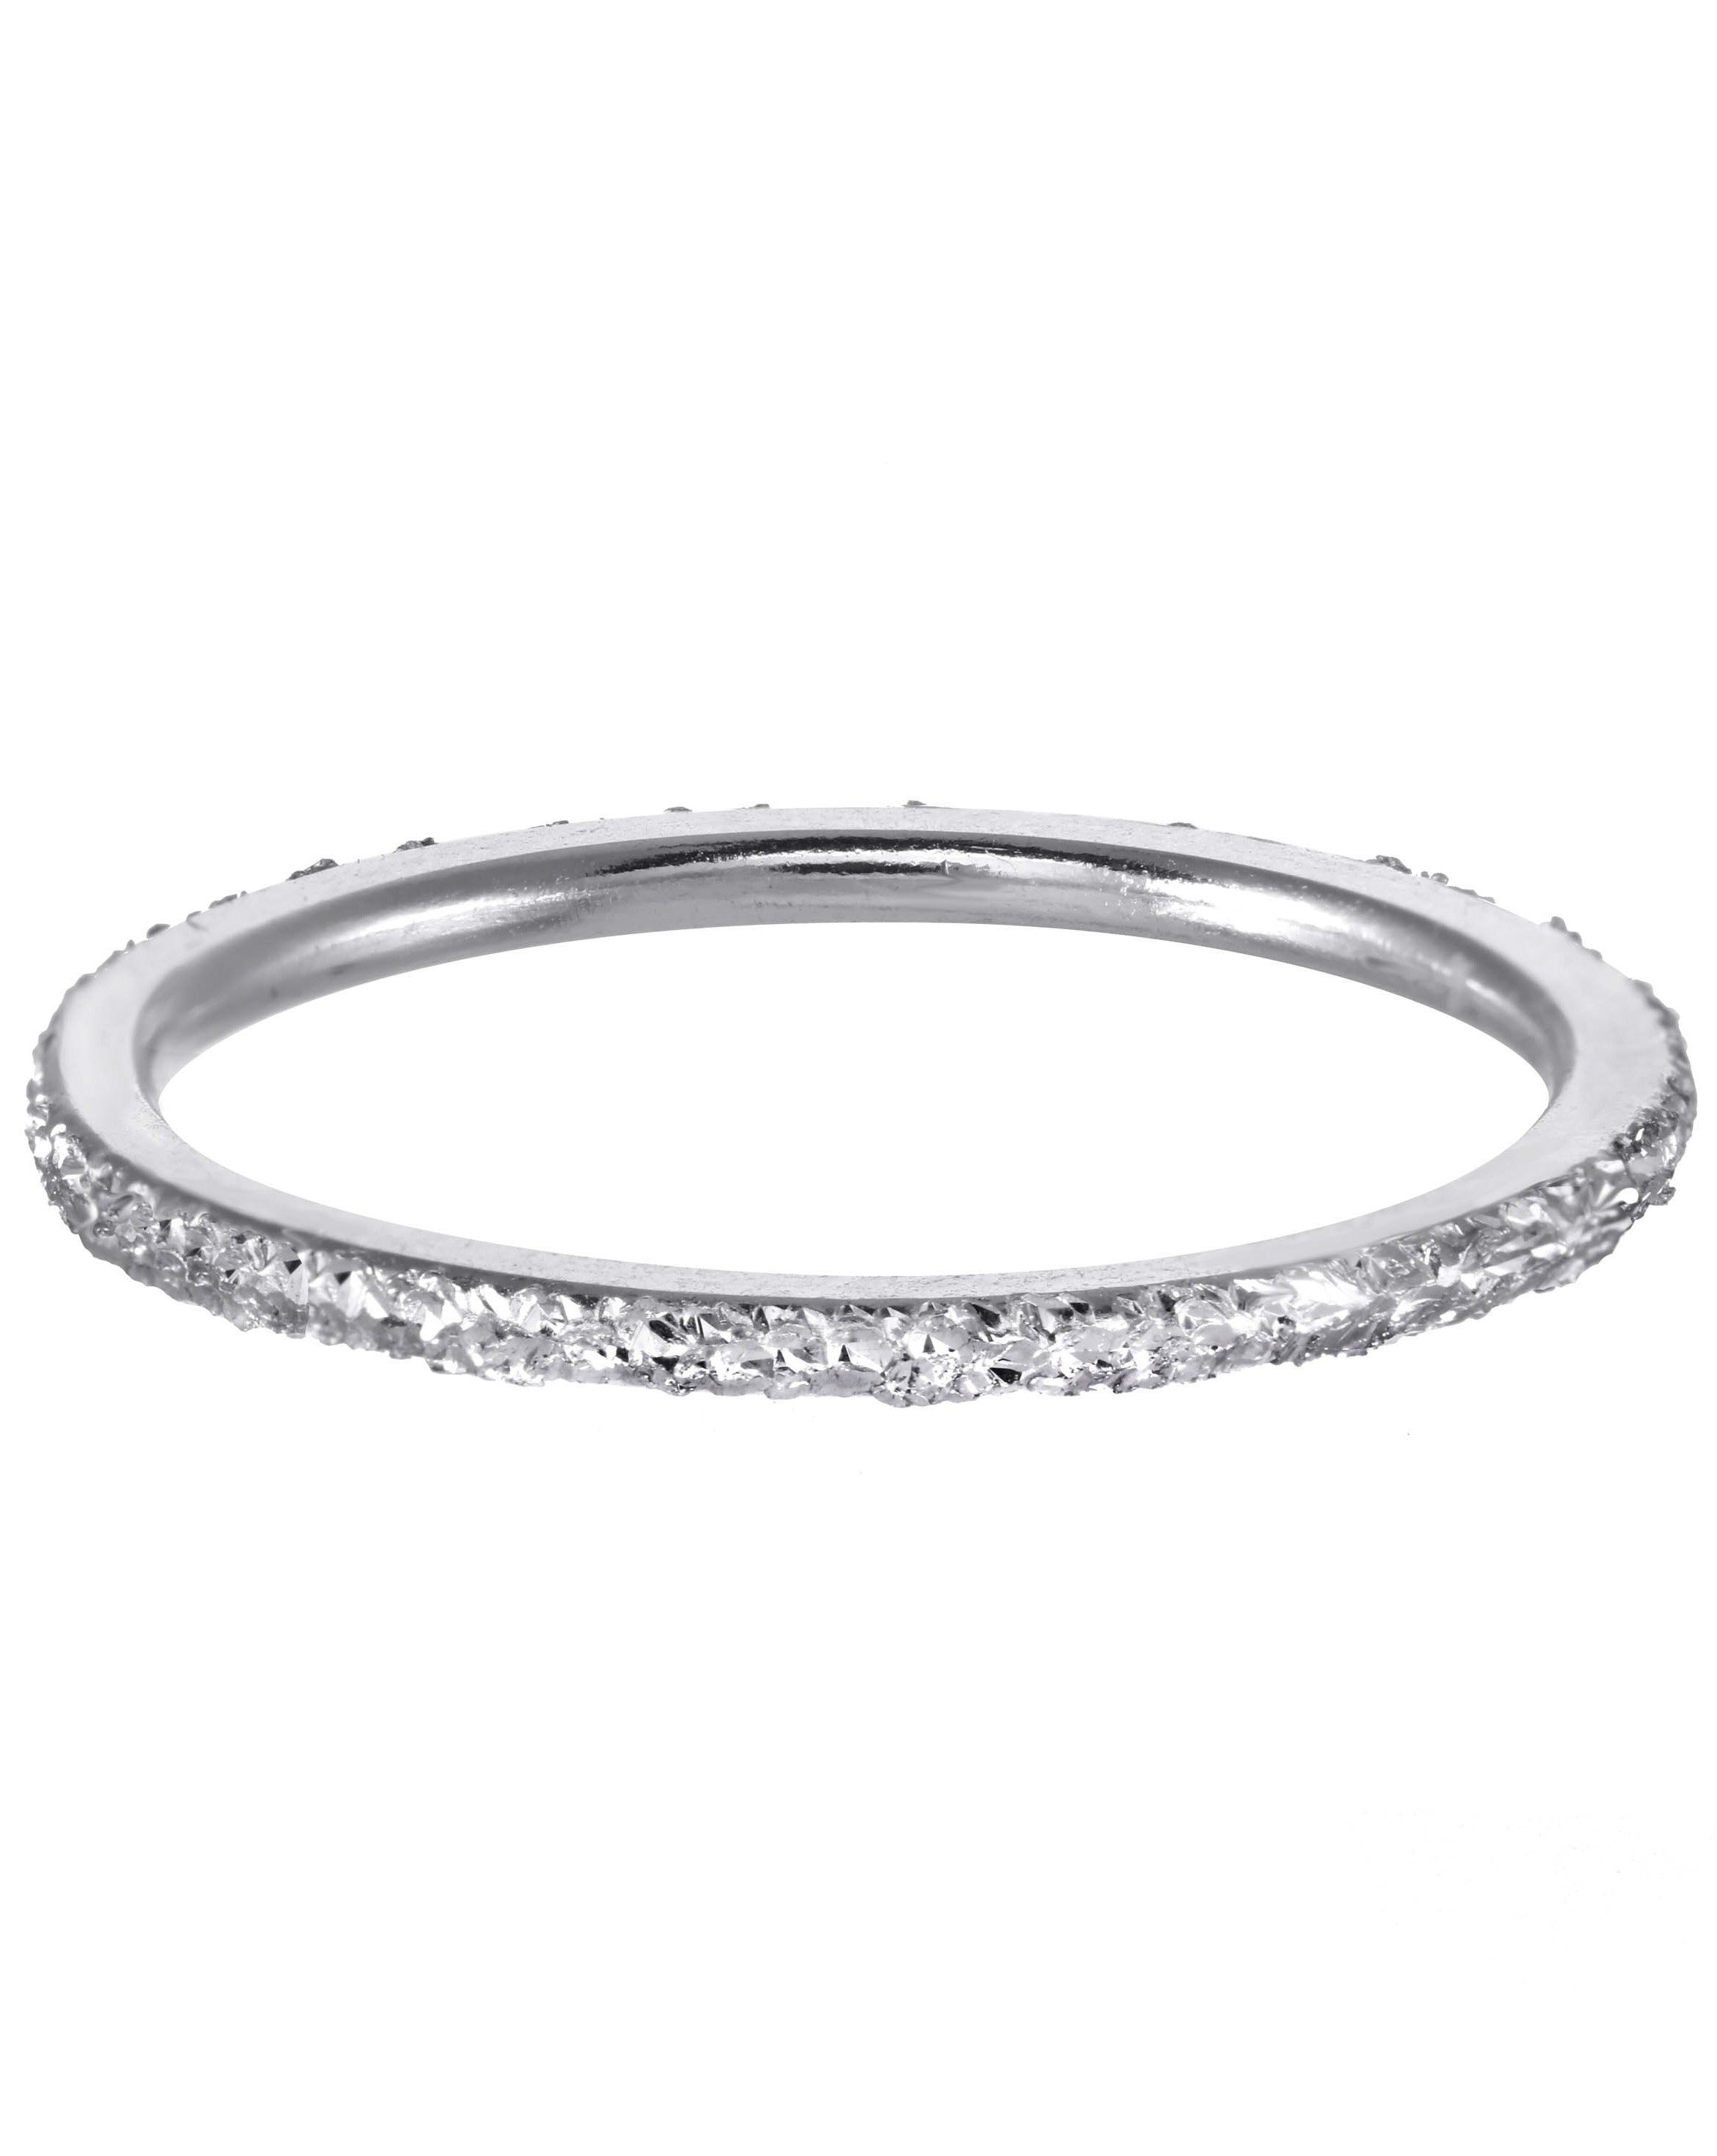 Glisten Ring by KOZAKH. A 1.5mm diamond textured band, crafted in Sterling Silver.